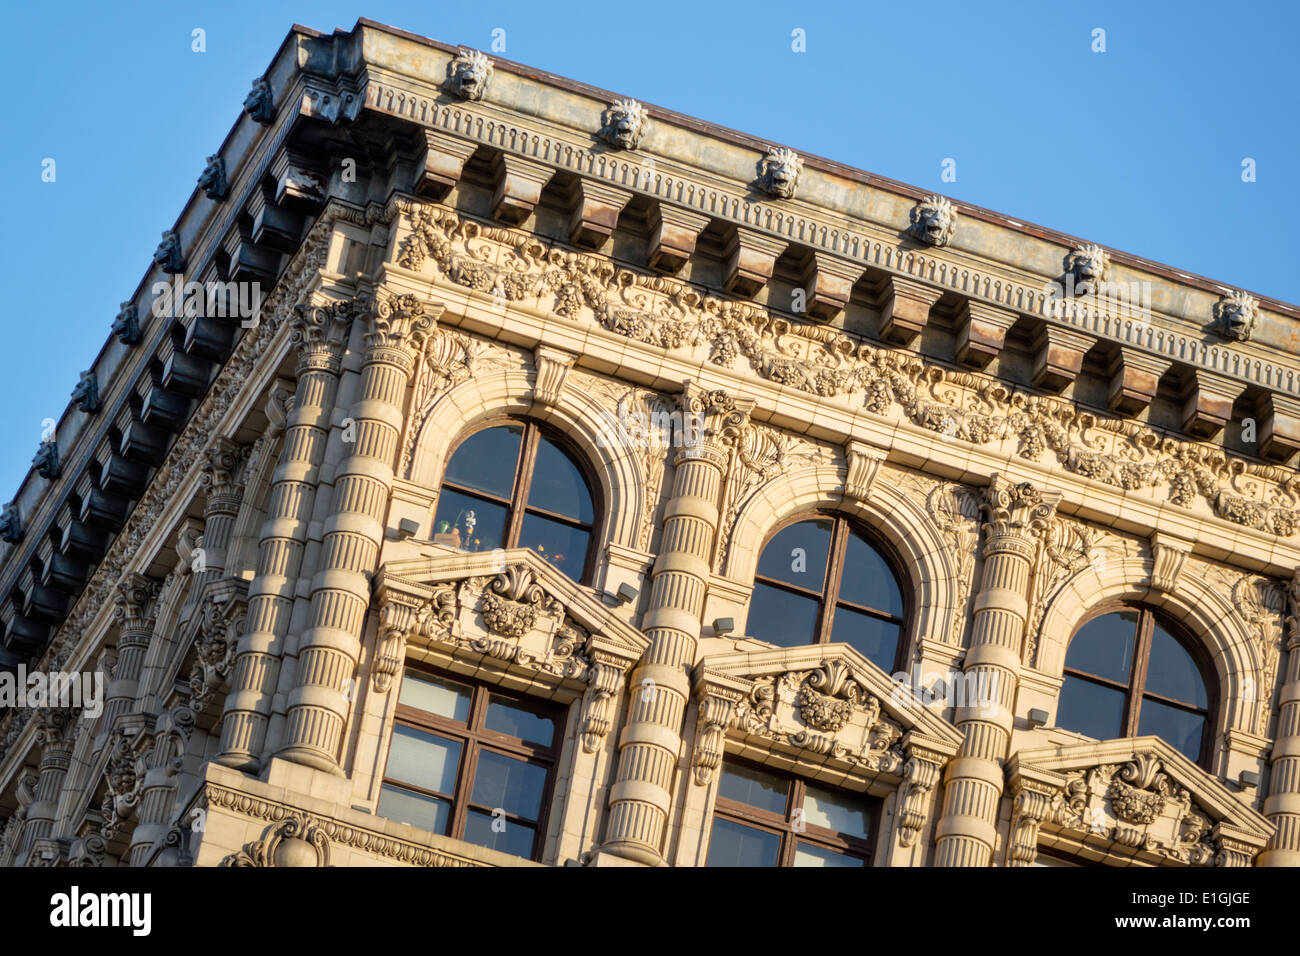 Los Angeles California,Downtown,historic Core,Spring Street,The Continental building,Braly Block,Beaux Arts,architecture,architectural,John Parkinson, Stock Photo